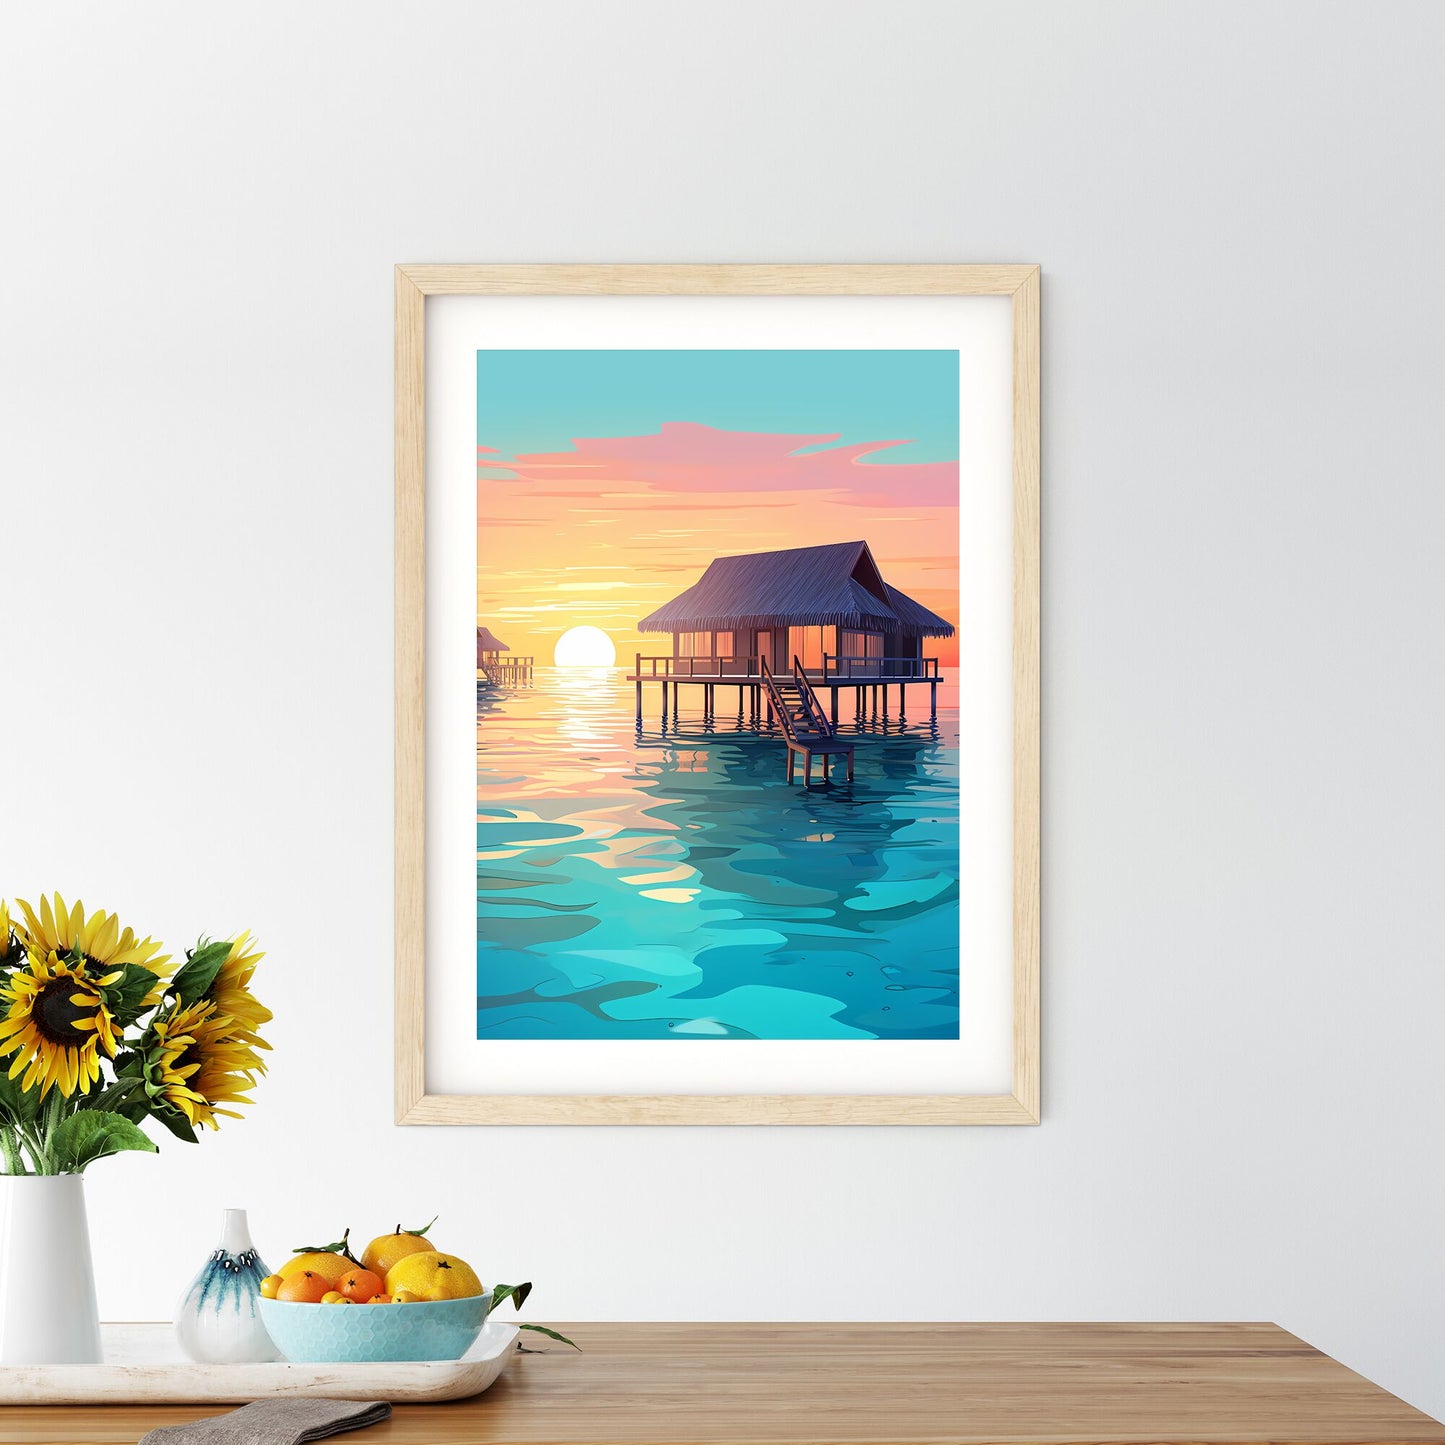 Group Of Houses On Stilts In Water Art Print Default Title